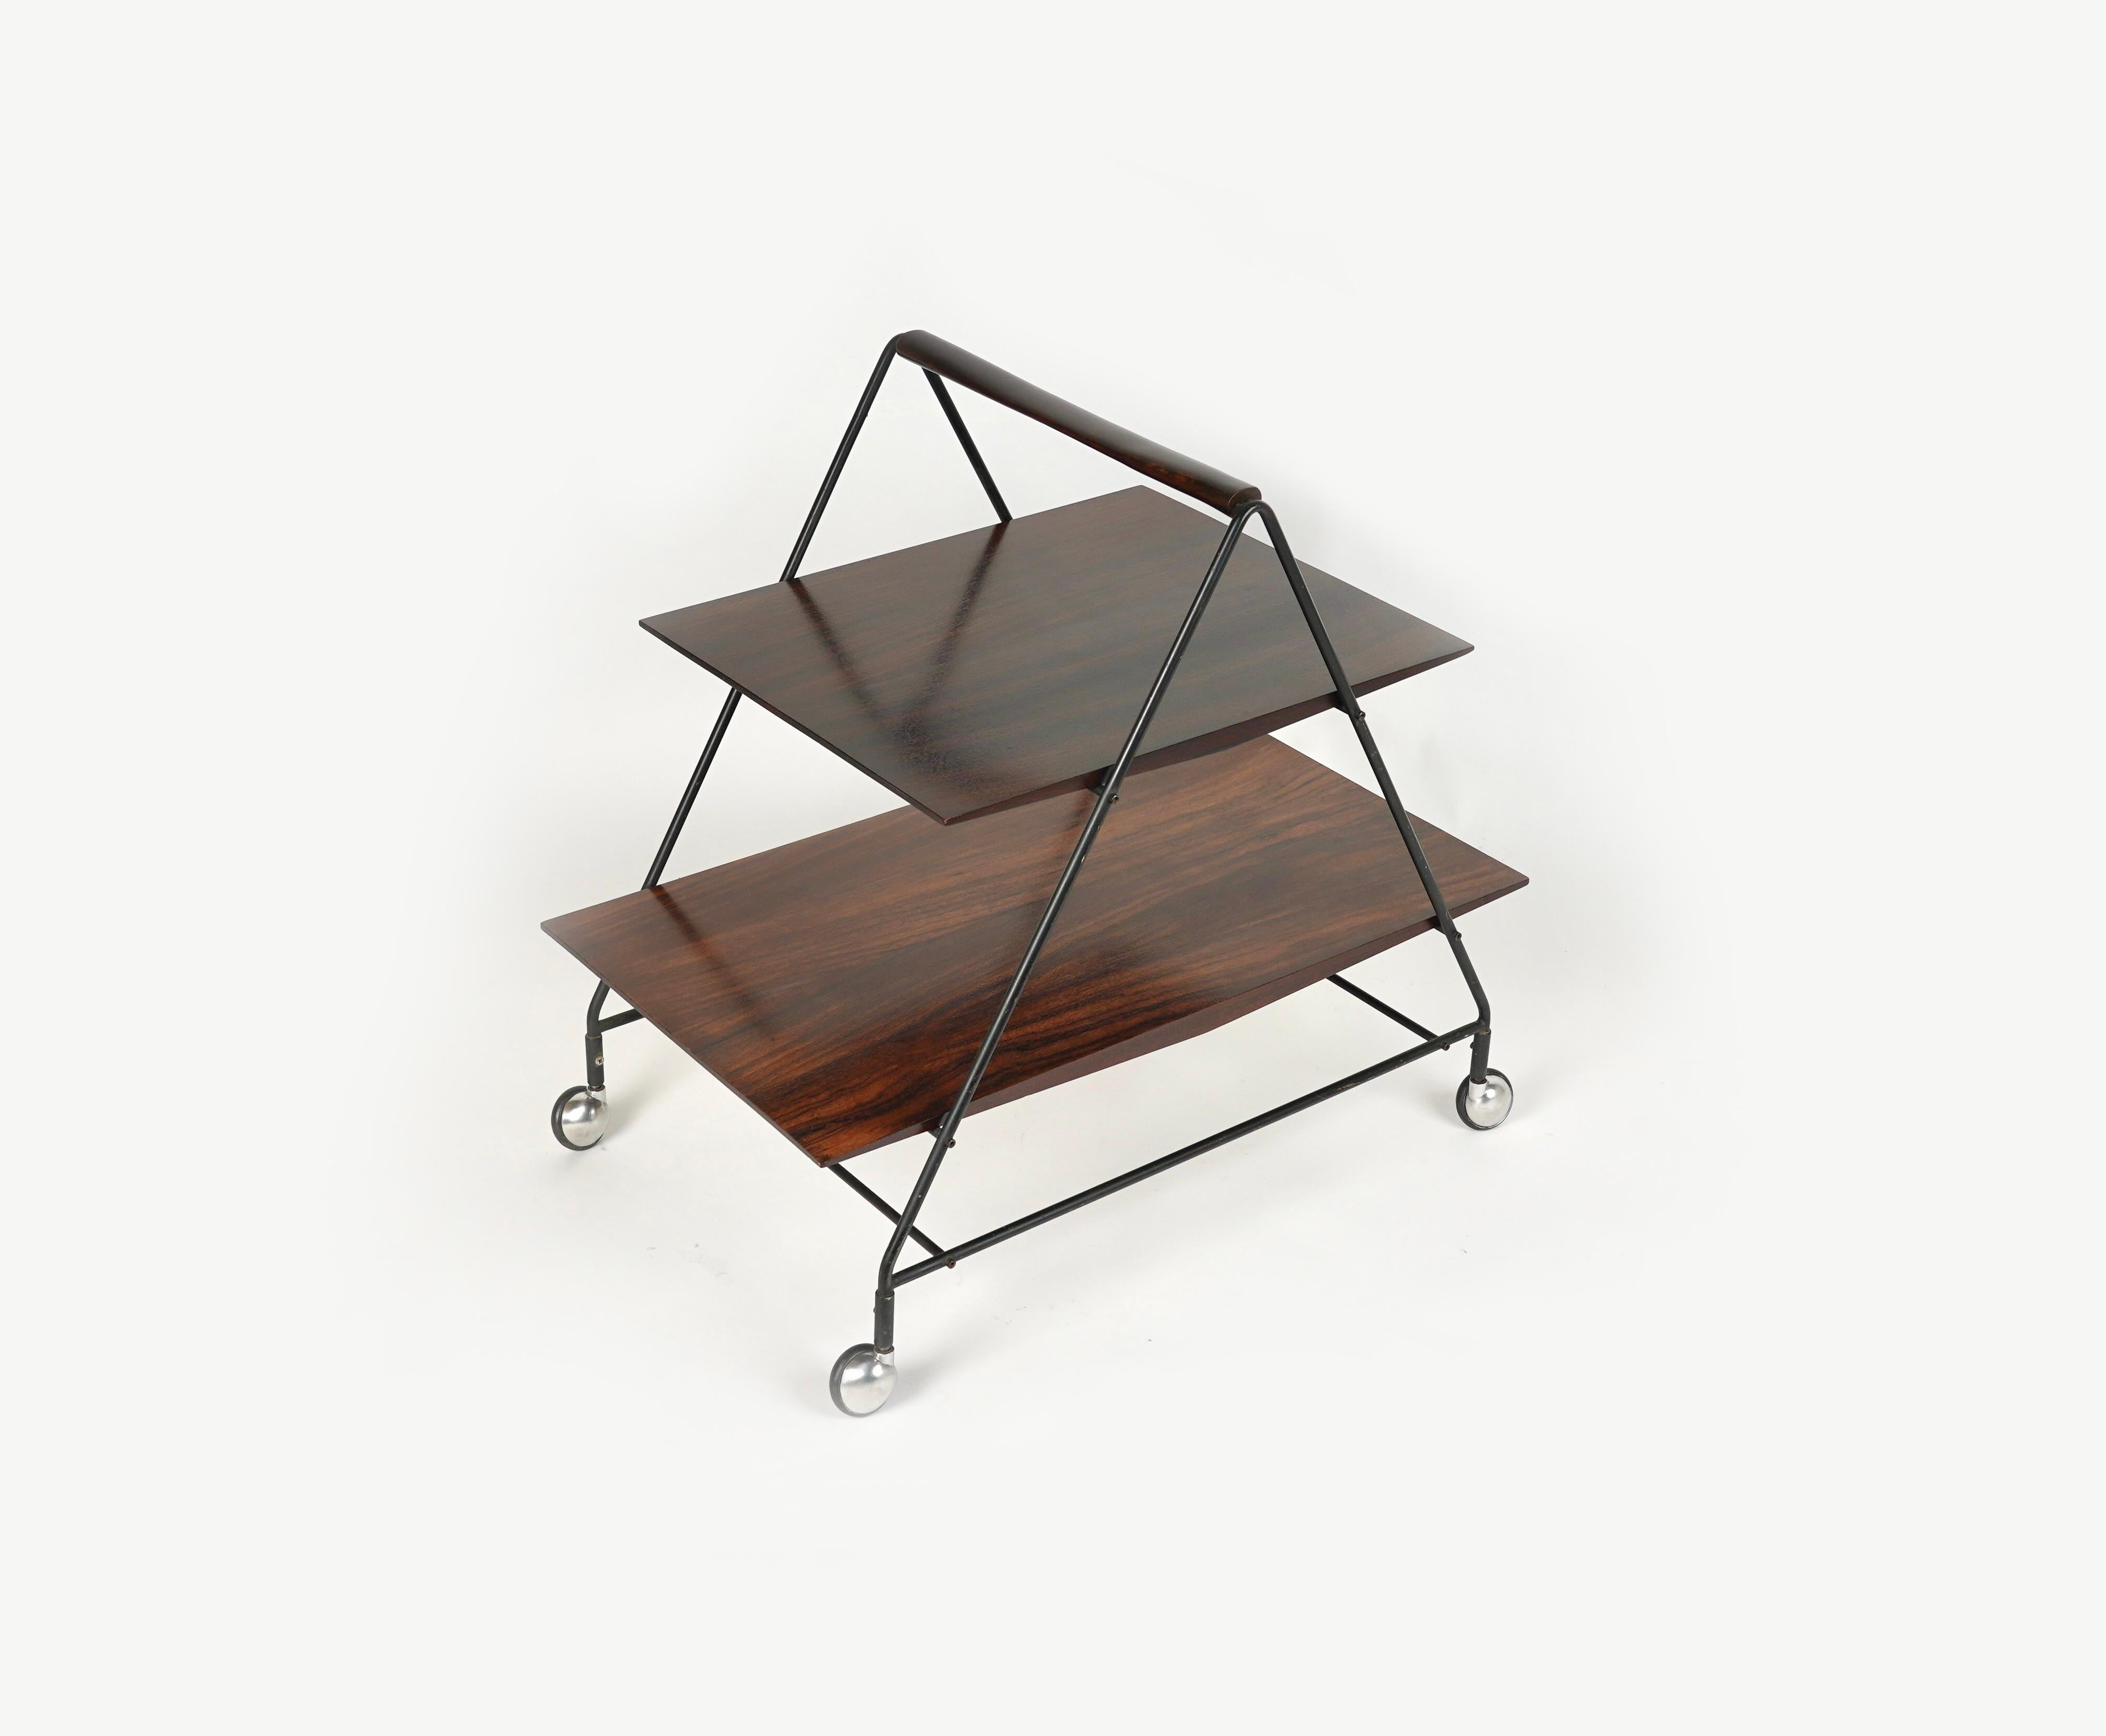 Mid-Century serving bar / tea cart in wood and black painted metal with Two Trays by Ico Parisi for MIM Roma (Mobili Italiani Moderni).

Made in Italy in the 1960s.

Ico Parisi was born in Palermo in 1916. He graduated in construction and served